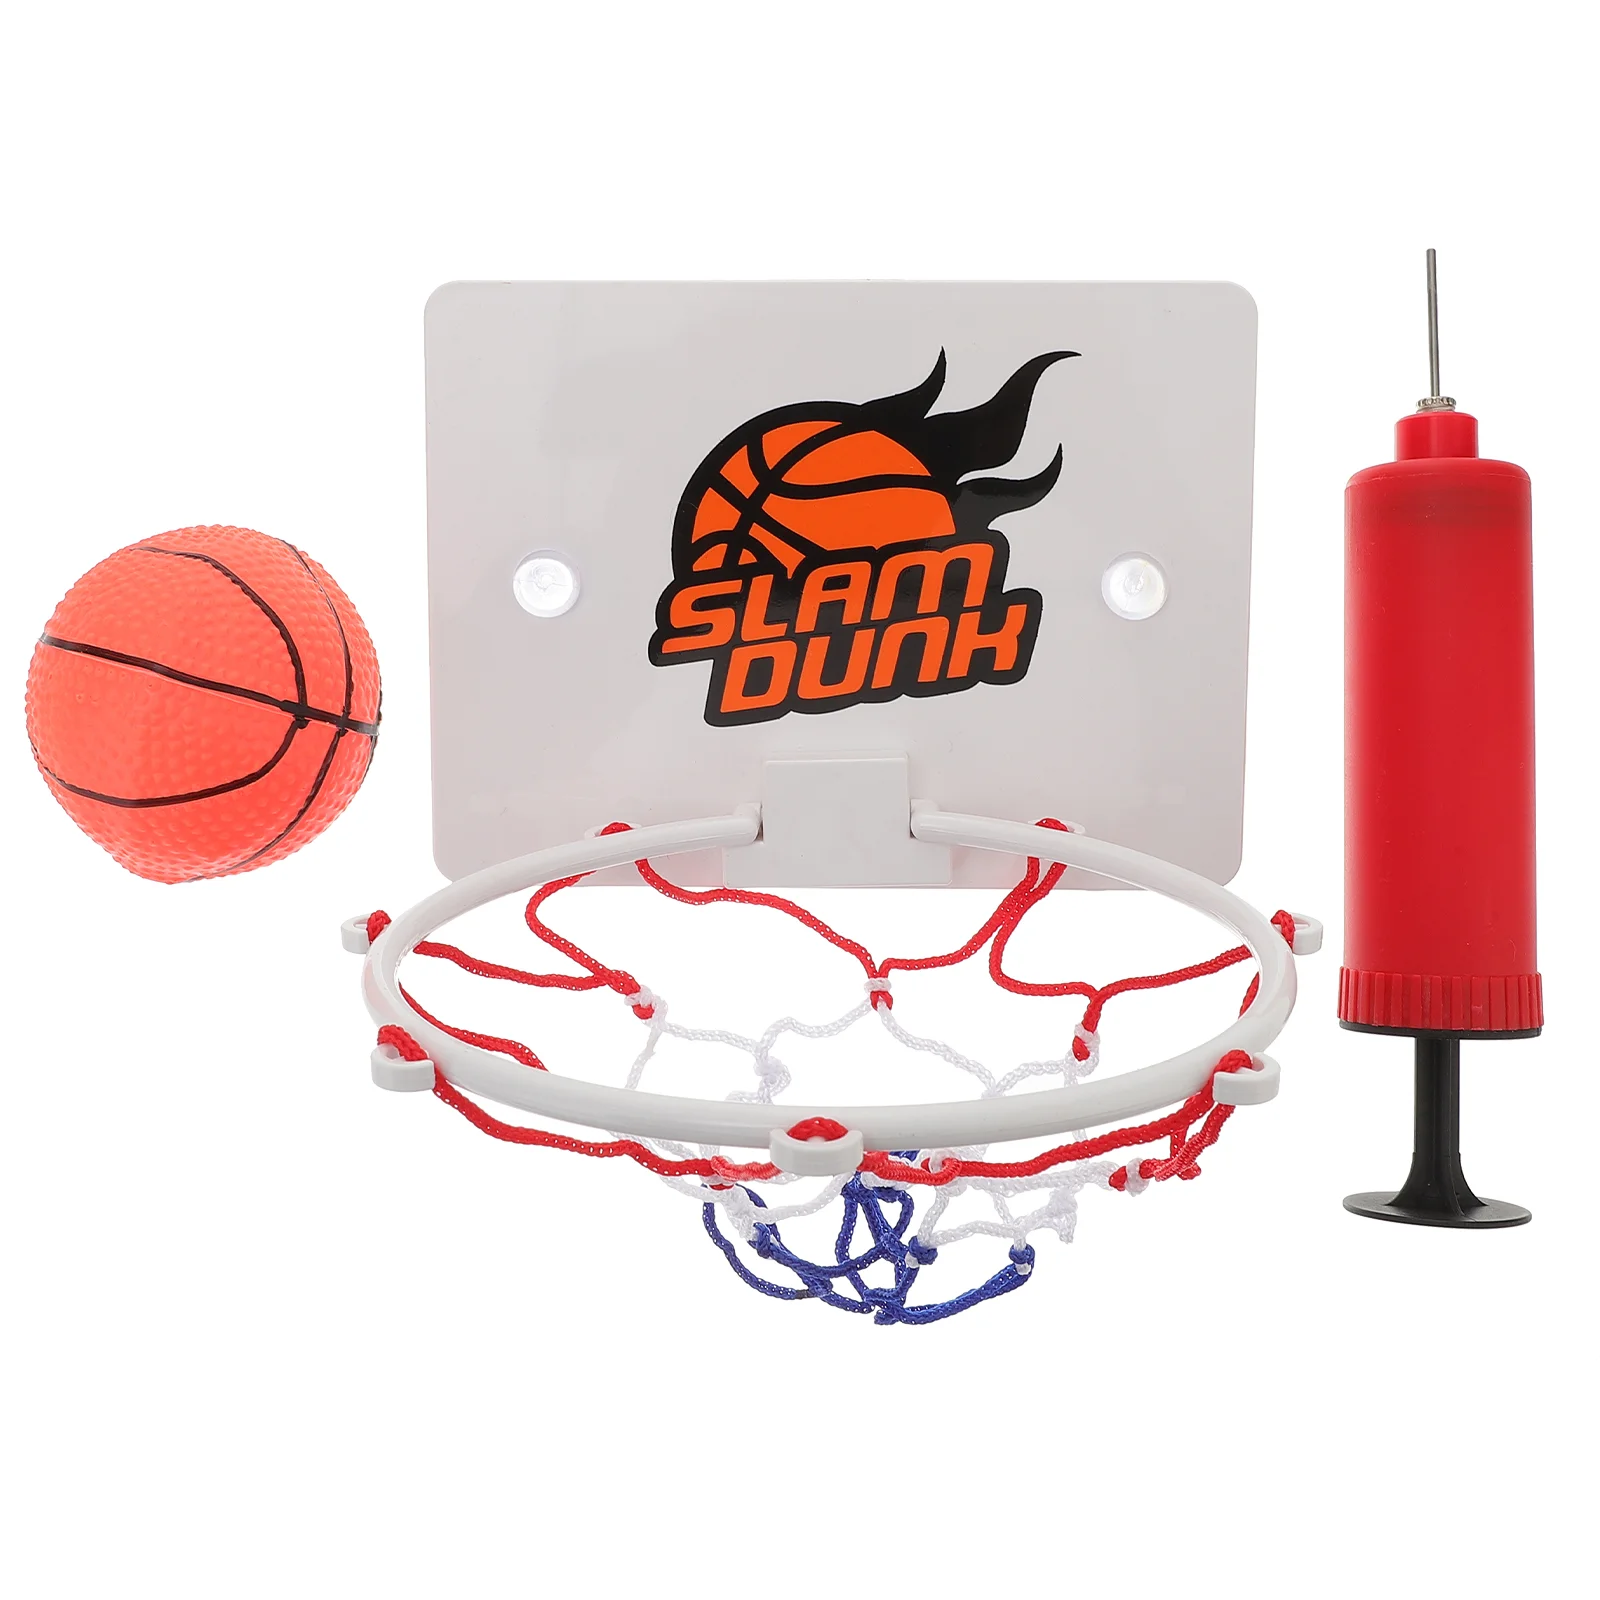 Basketball Over the Door Basketball Backboard Sports Exercise with Pump and Balls for Basketball Lovers Boys Indoor Outdoor 6x4 5m classic inflatable tunnel tent with rear door curtain for sports game garage marquee entrance run through archway